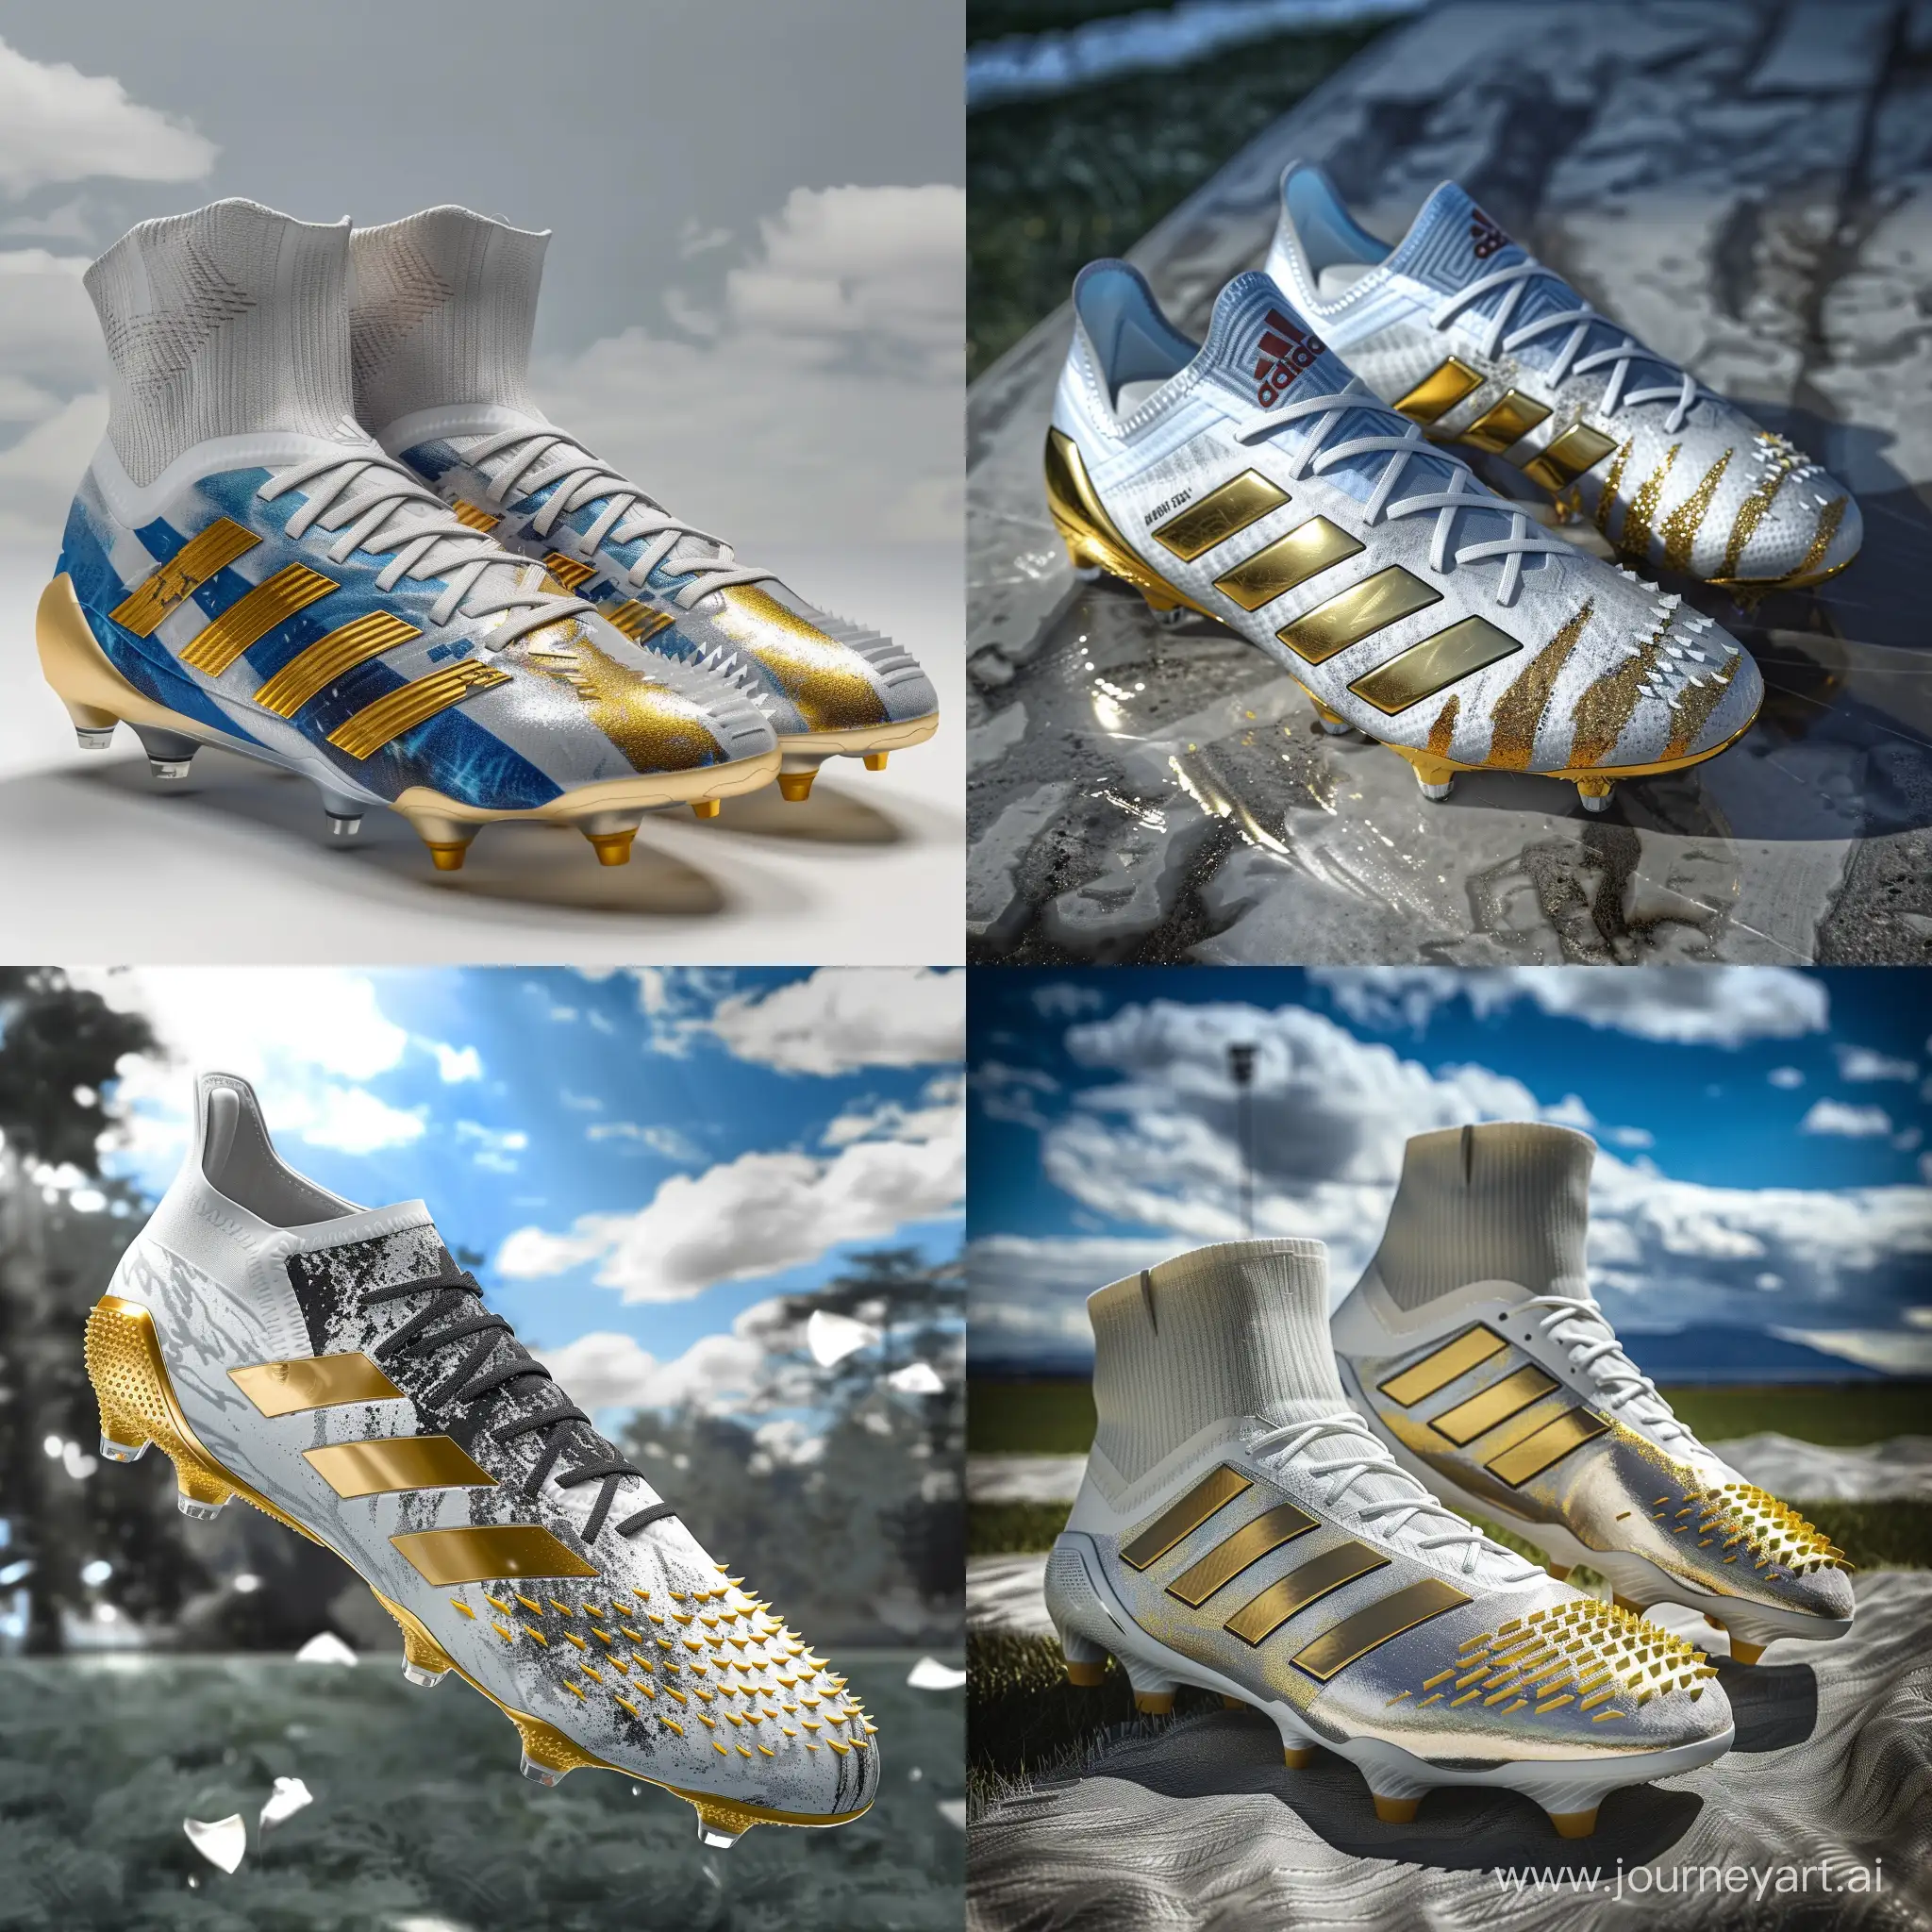 Adidas Modern Football Boots, Argentina flag Design, Photography in Sky, Gold & White Detailed, Hyper Realistic, 8k, High Accuracy